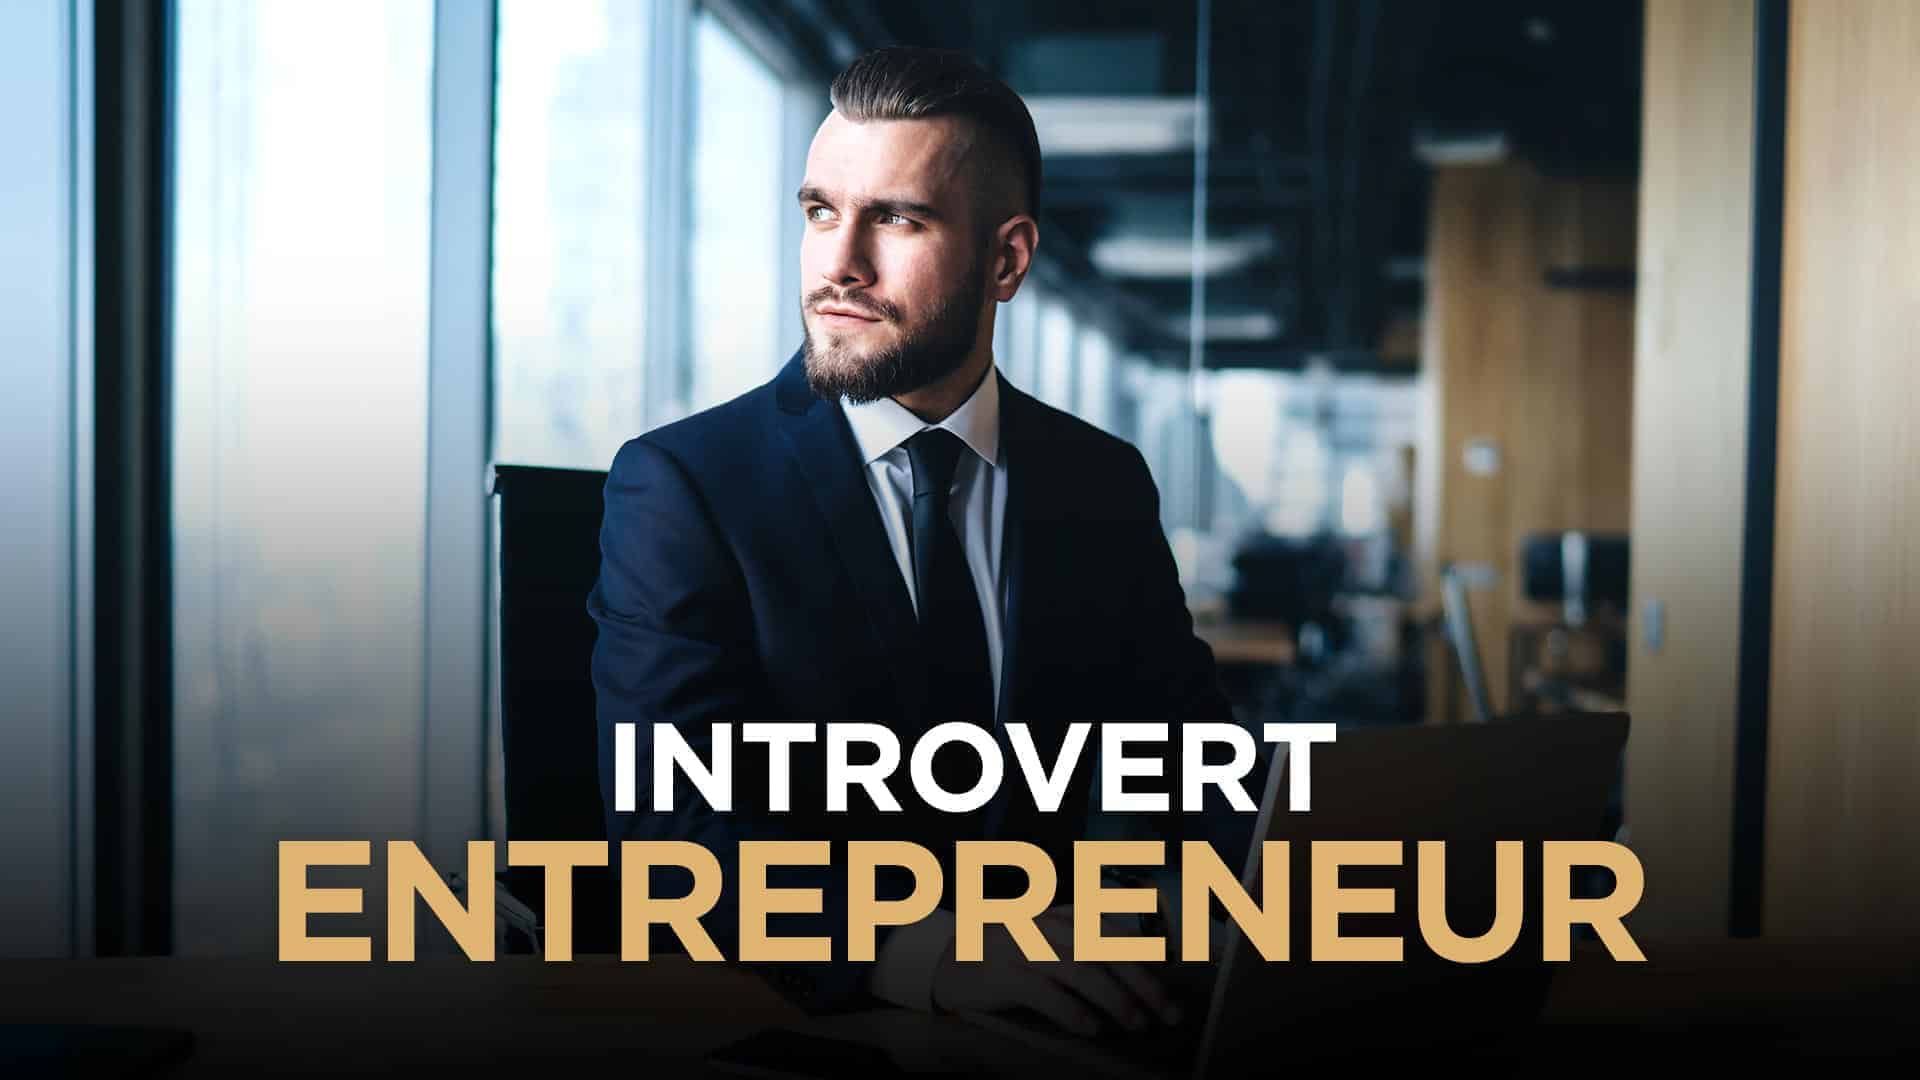 7 Ways That An Introvert Entrepreneur Can Succeed At Growing A Startup